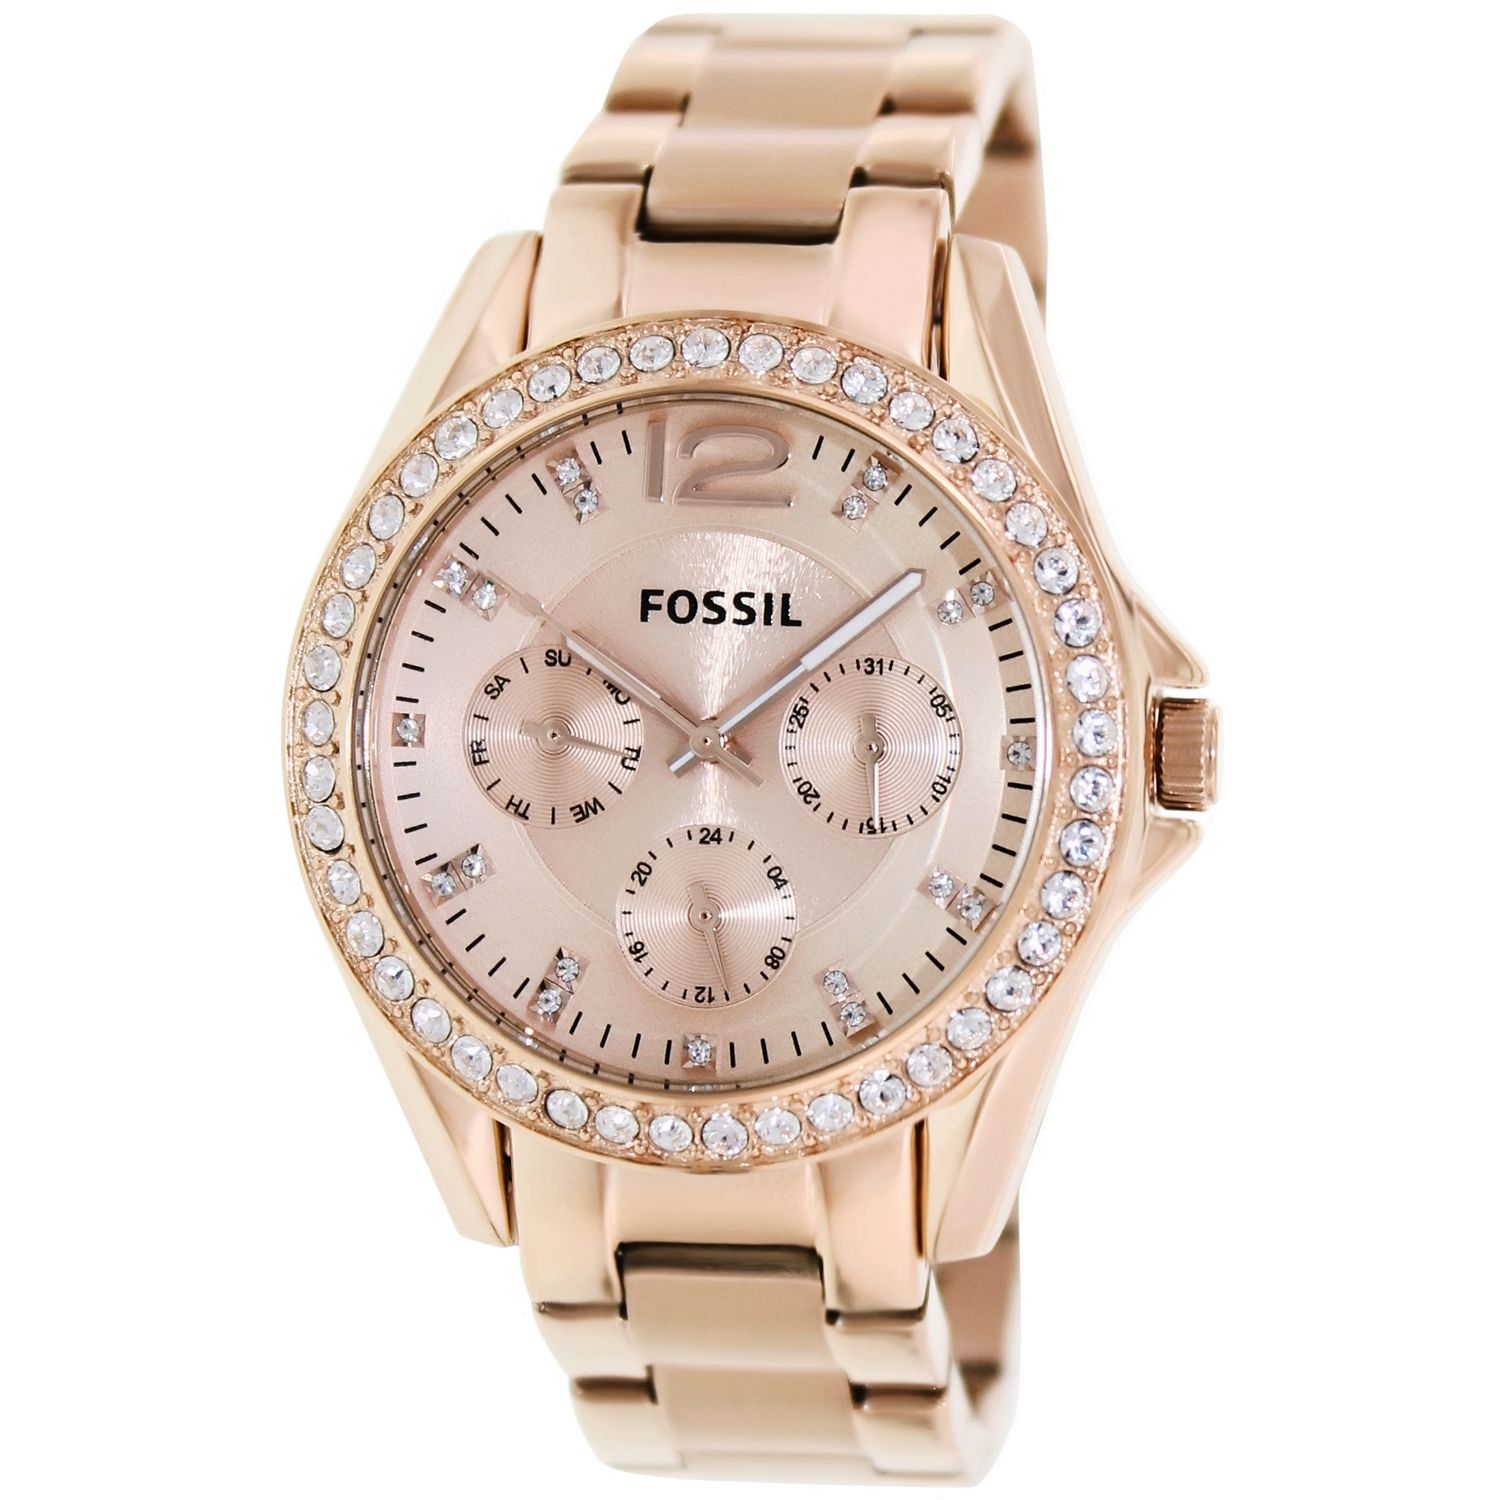 Fossil women’s Riley rose gold stainless steel fashion watch for $74, free shipping